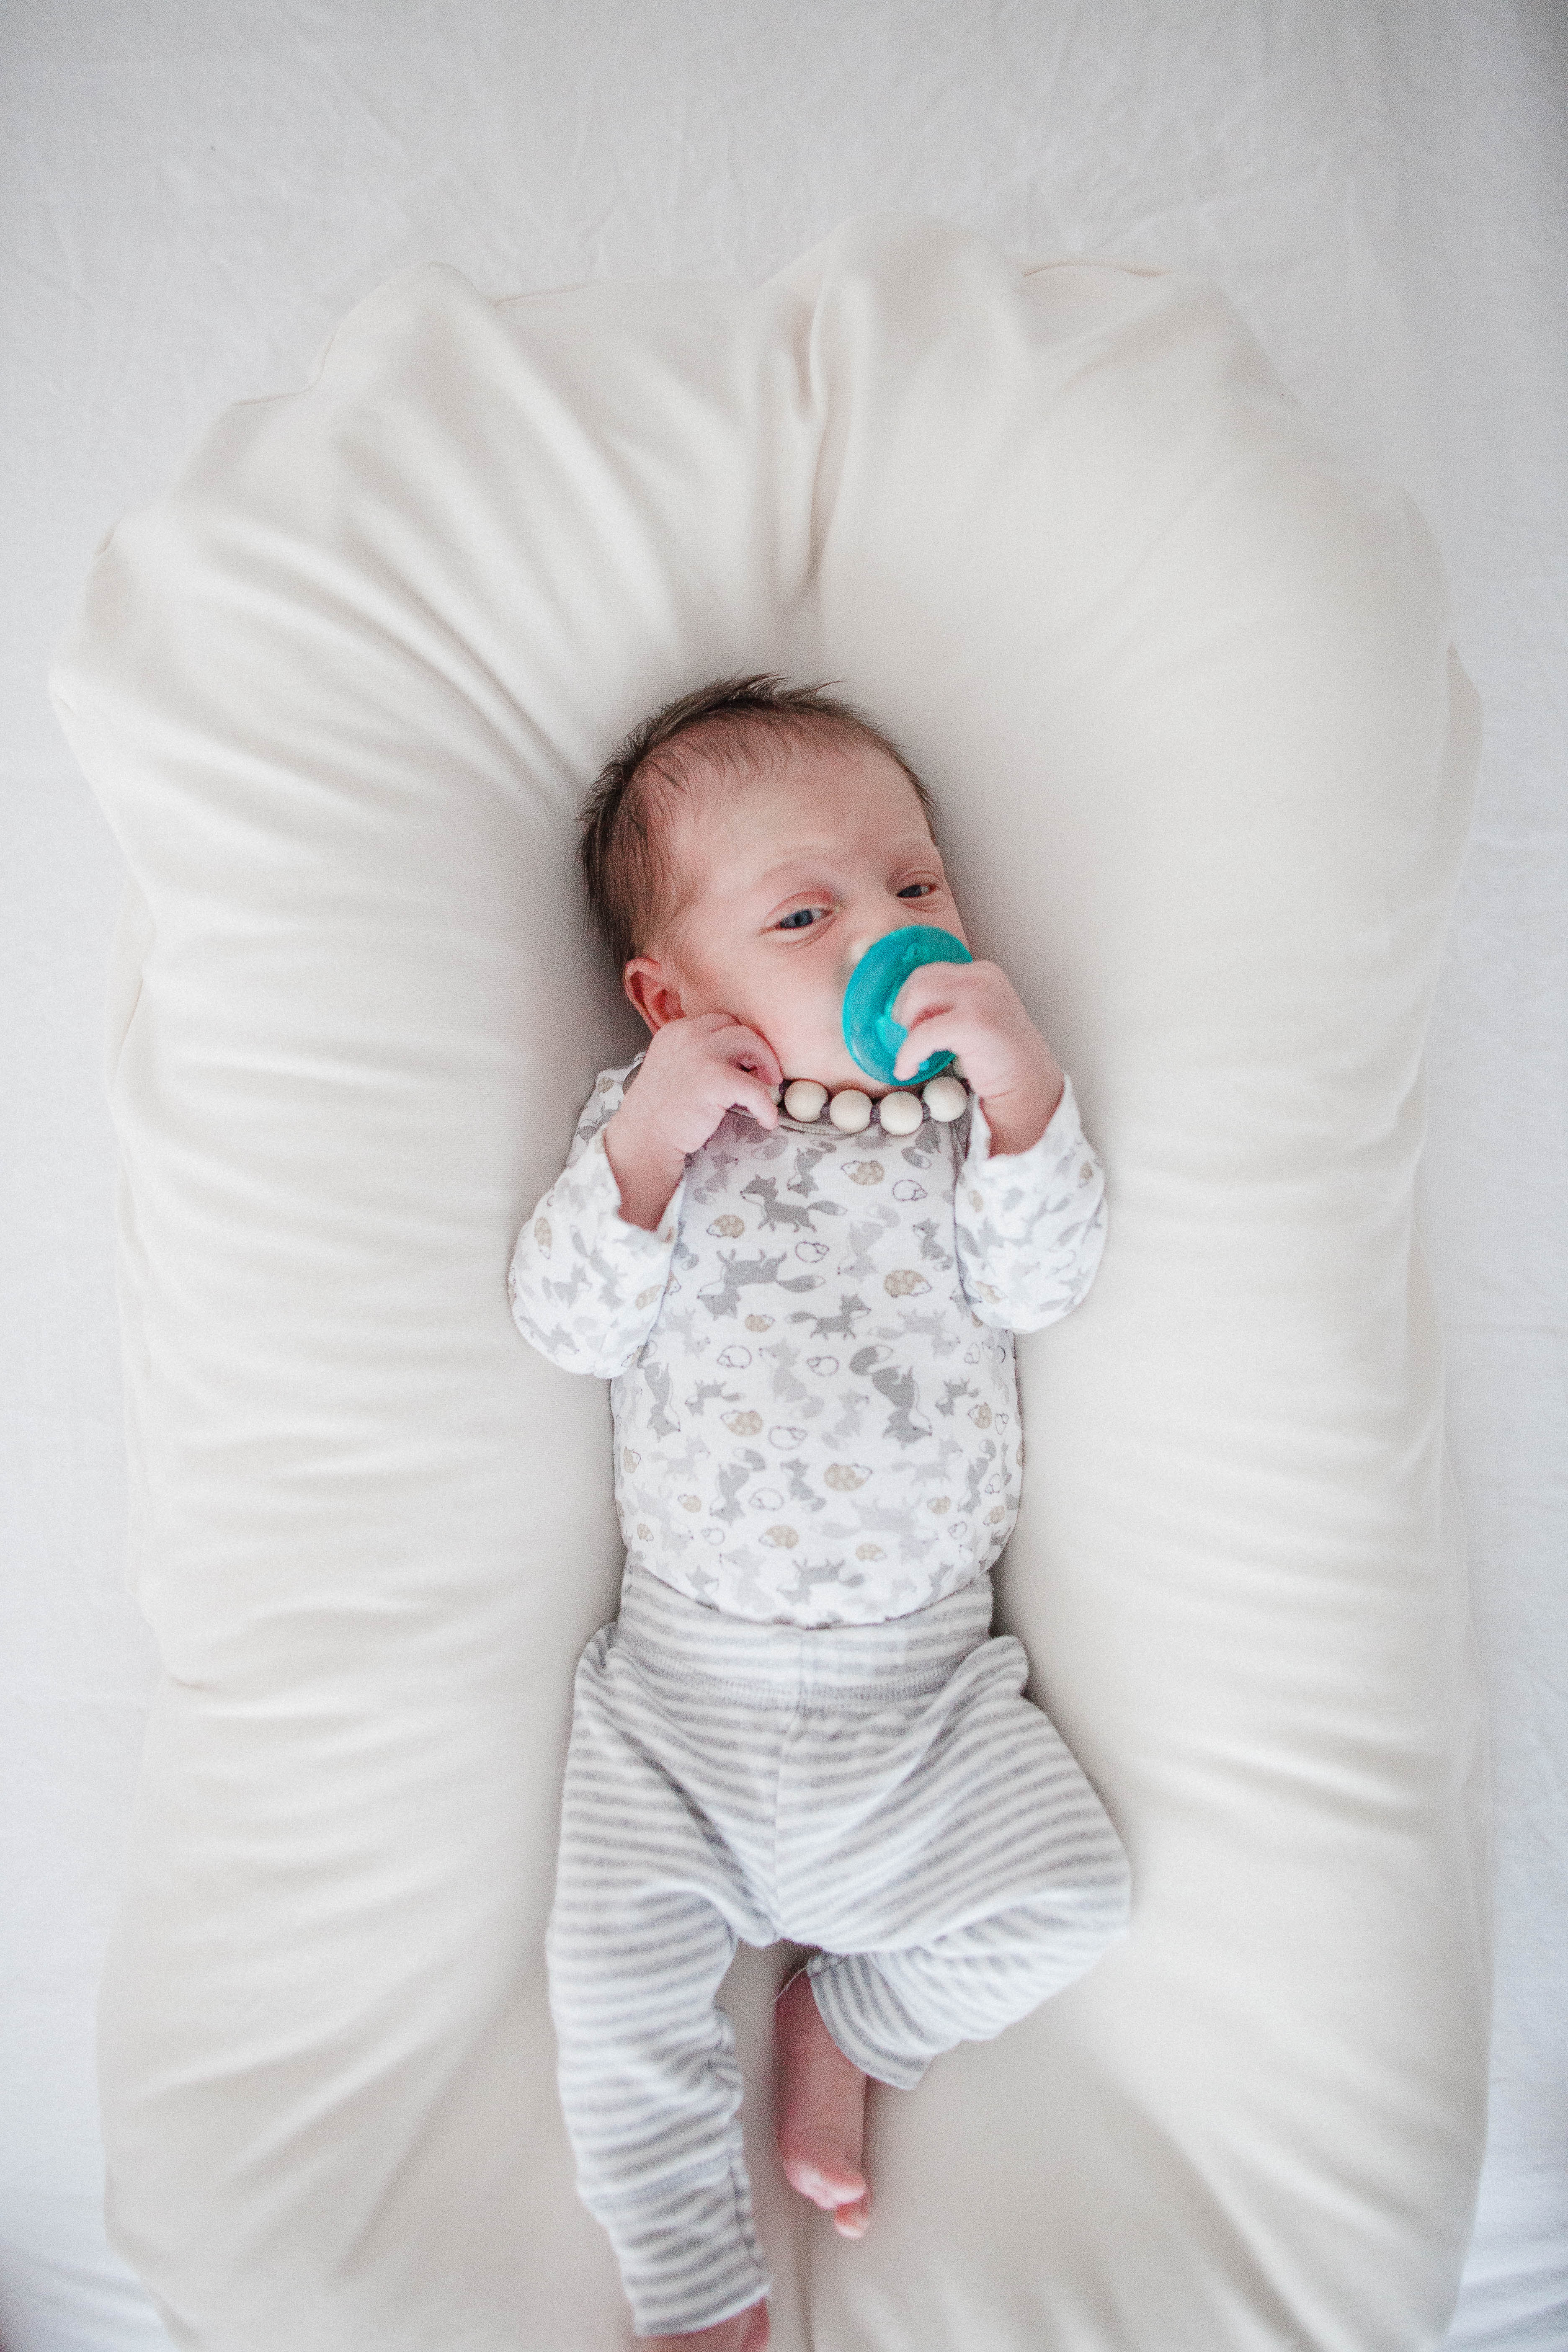 Life and style blogger Lauren McBride shares her Snuggle Me Review and coupon code and why it's the safest baby lounger on the market.